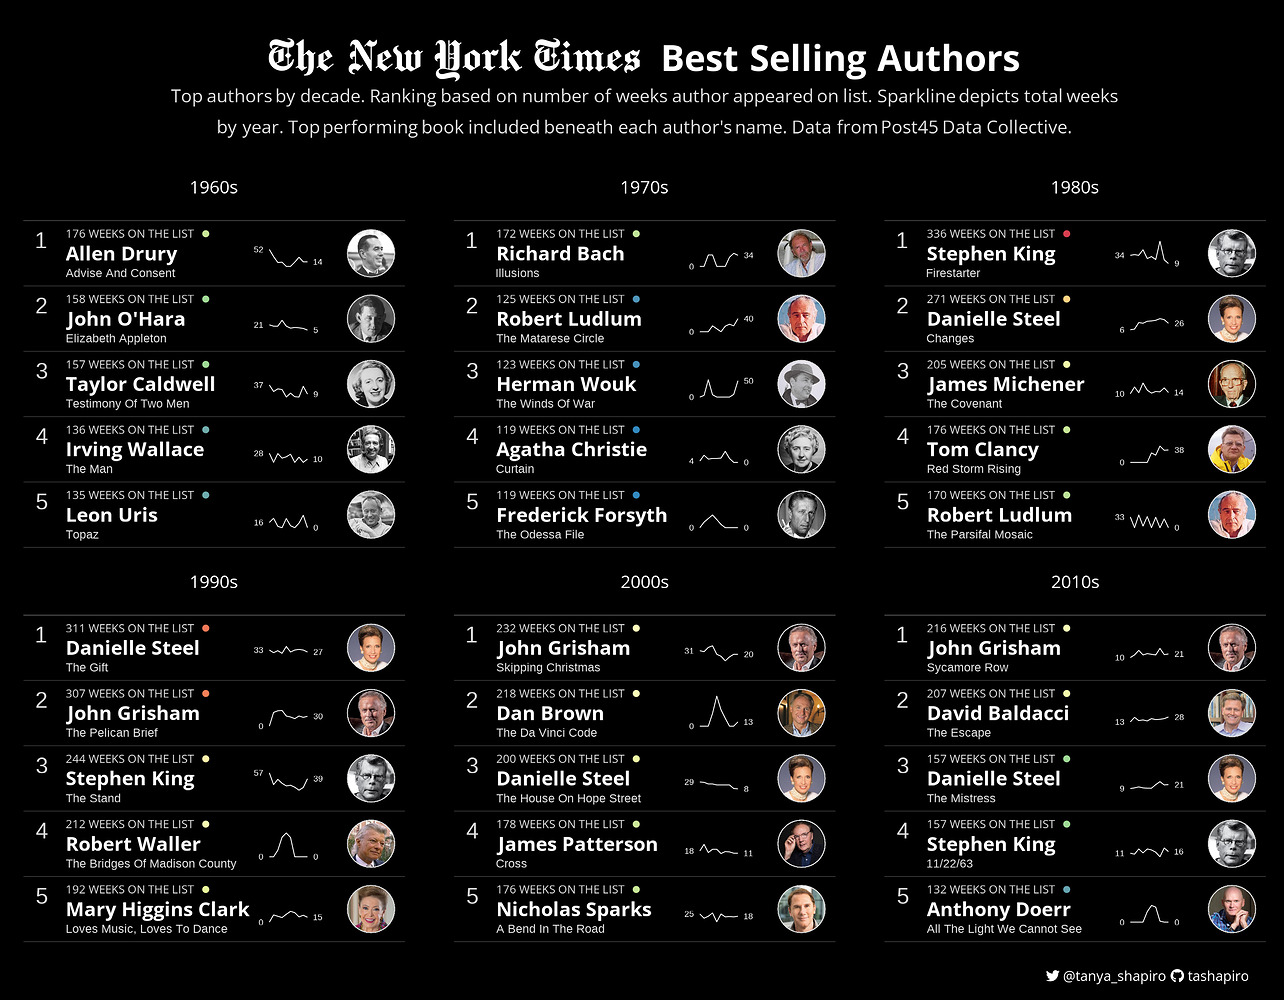 A table of New York Times bestselling authors, including the ranking, name, book, a sparkline of years on the list, and image of the author, for each decade from 1960s to 2010s 